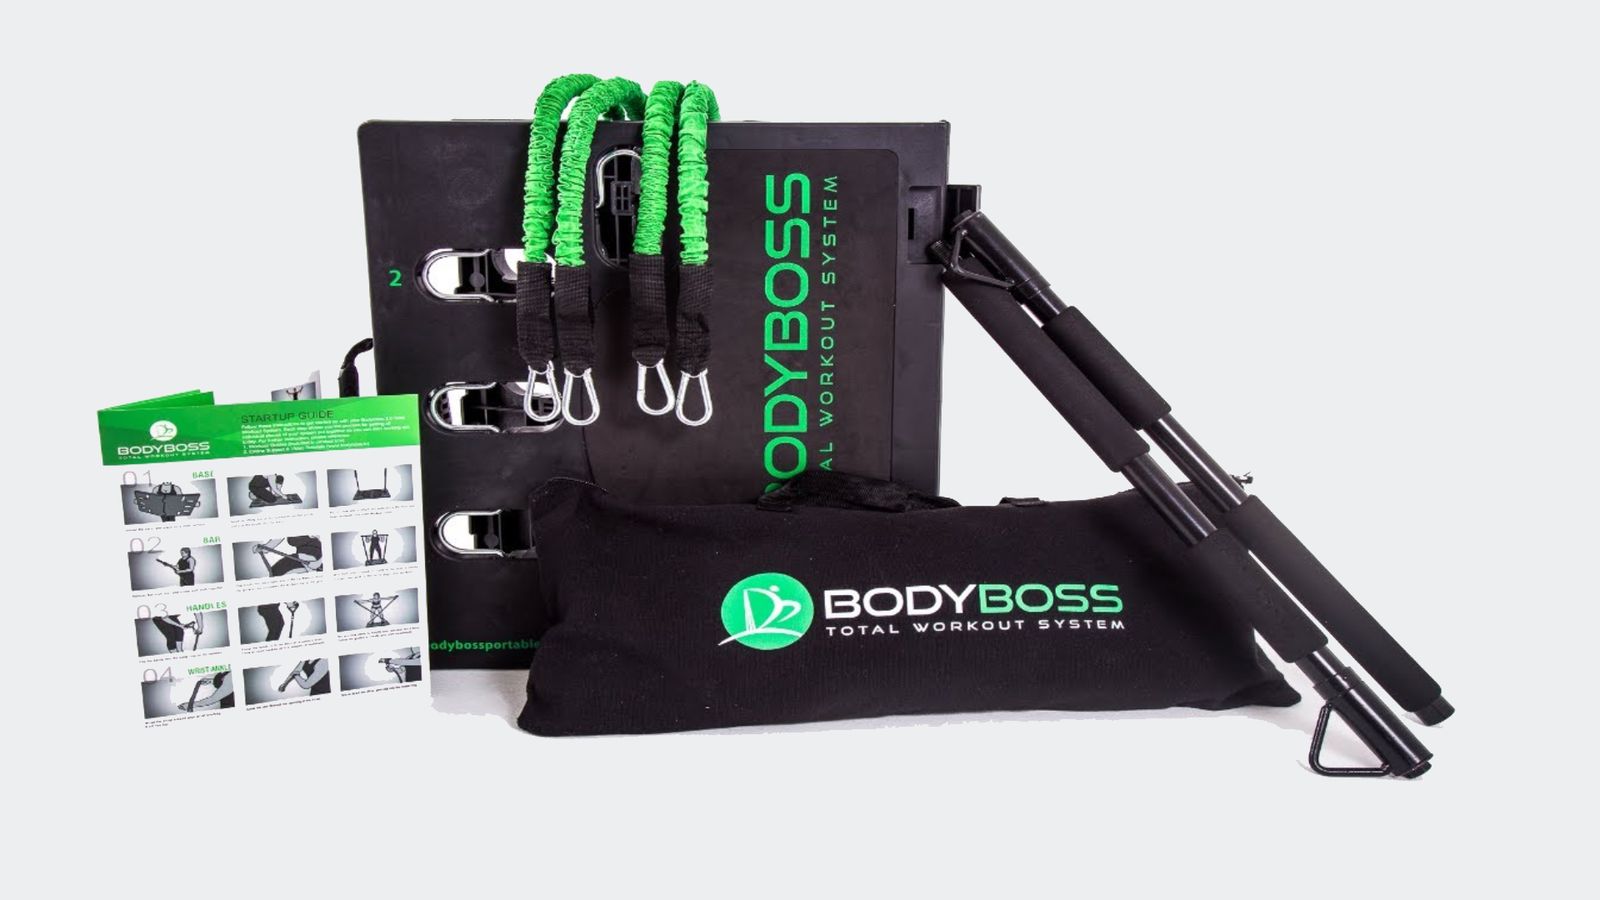 BodyBoss 2.0 product image of a black board with multiple attachments and cables with green branding.